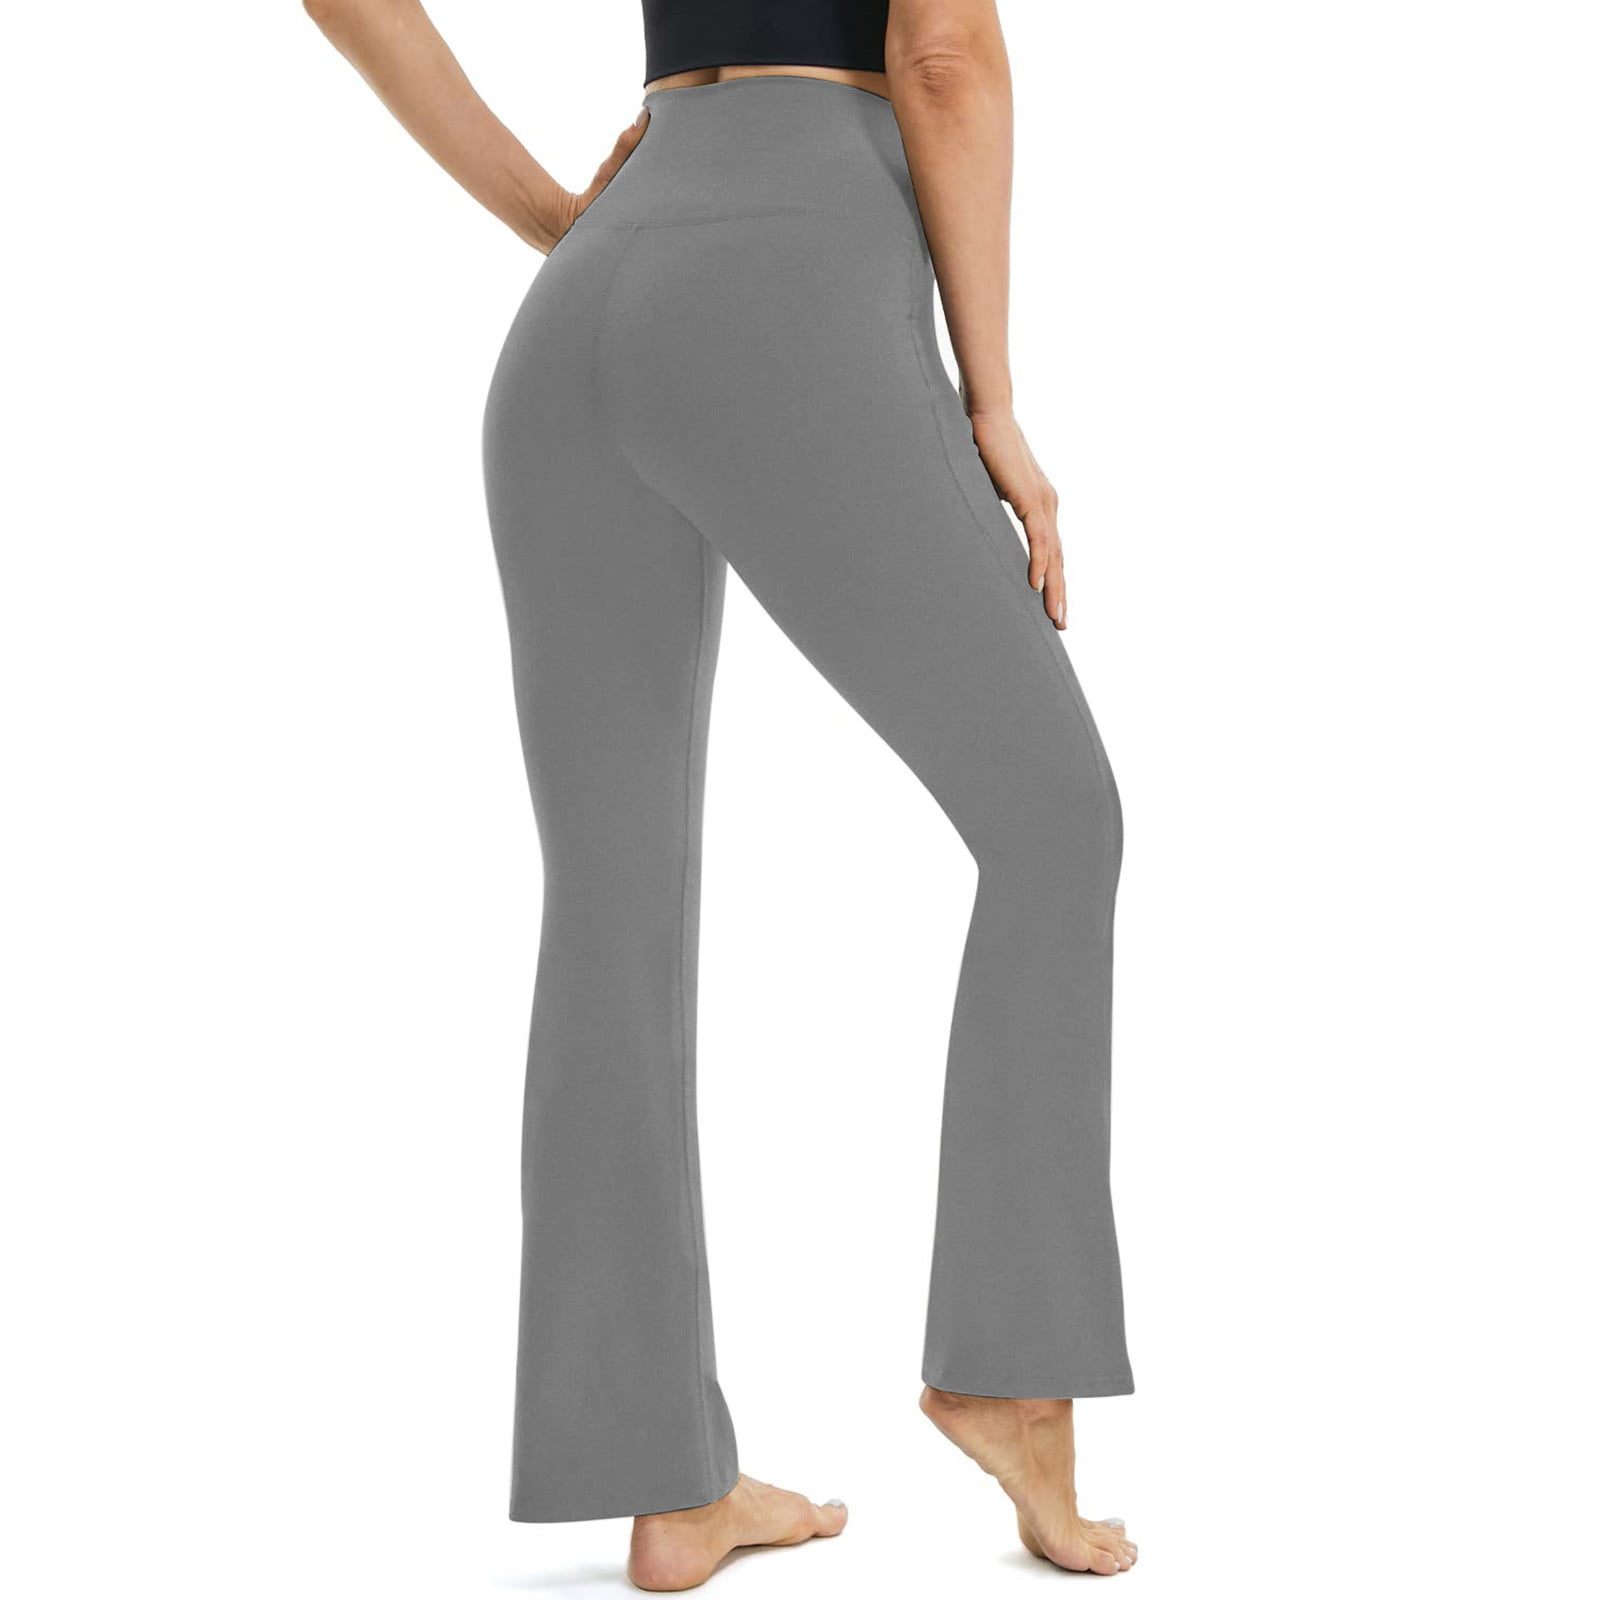 Hfyihgf Women's Bootcut Yoga Pants with Pockets V Crossover High Waisted  Wide Leg Workout Flare Pants Leggings Work Dress Pants(Gray,M) 